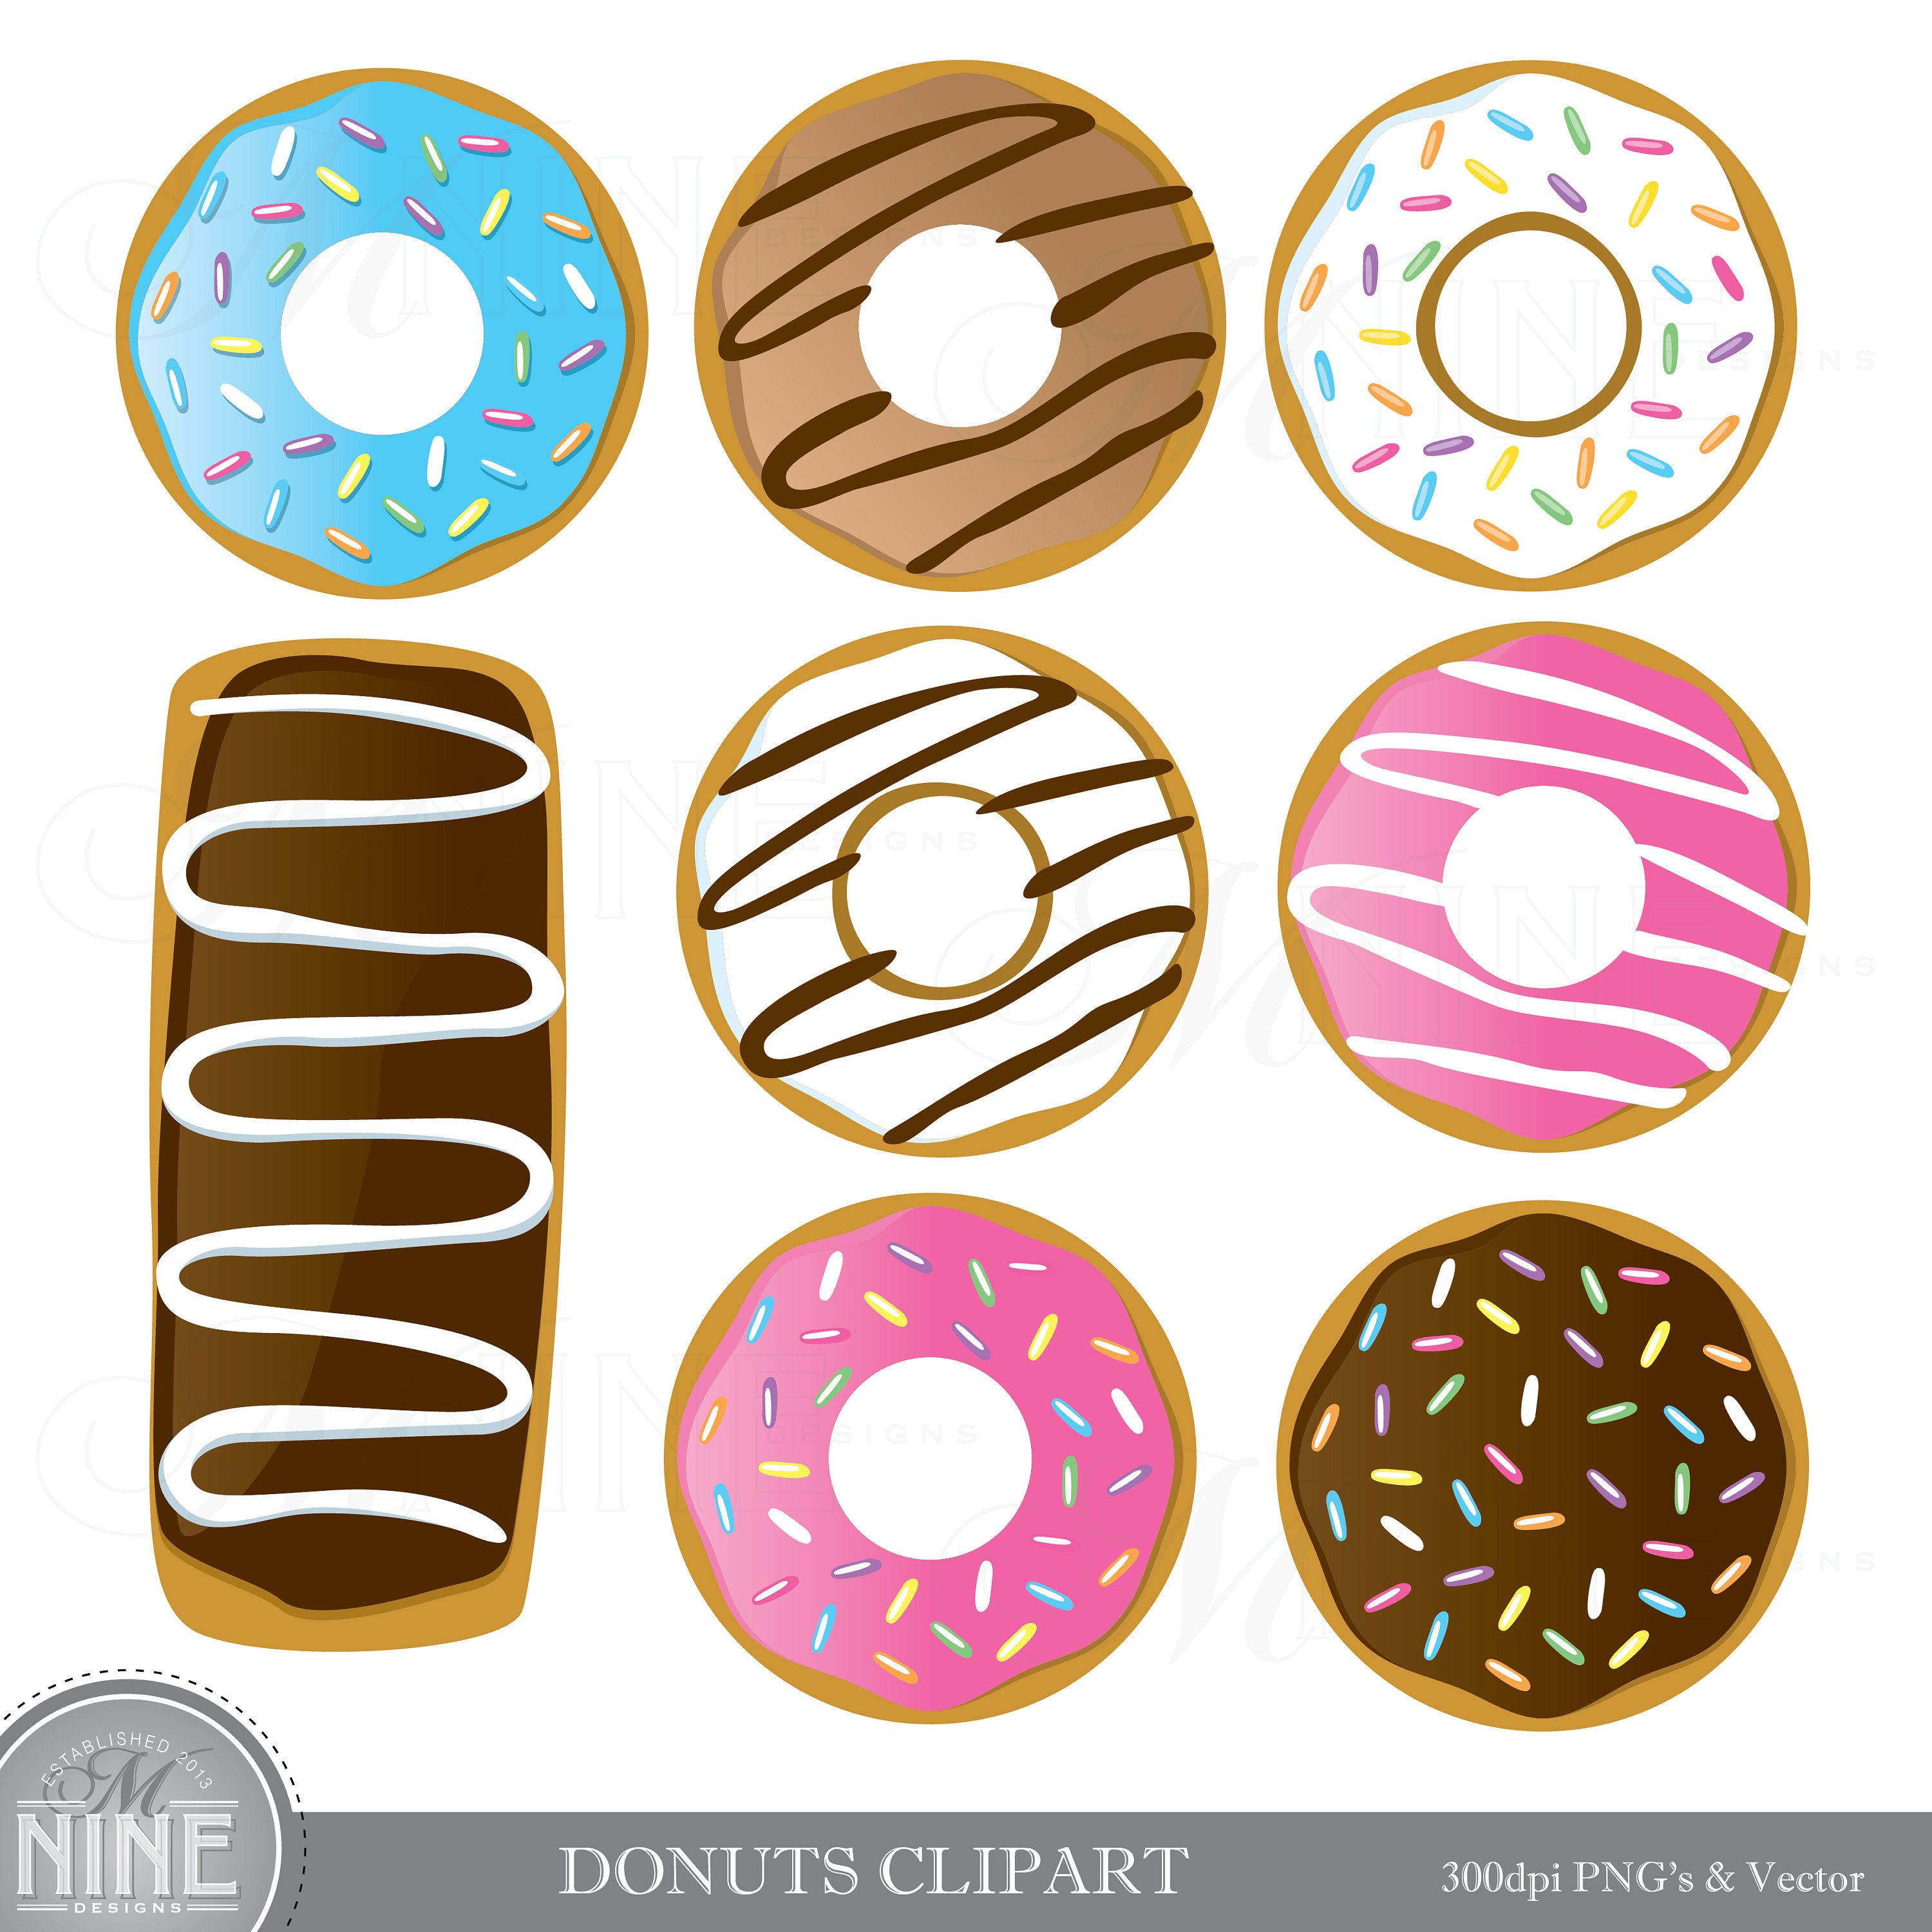 Clip art downloads party. Donuts clipart half donut